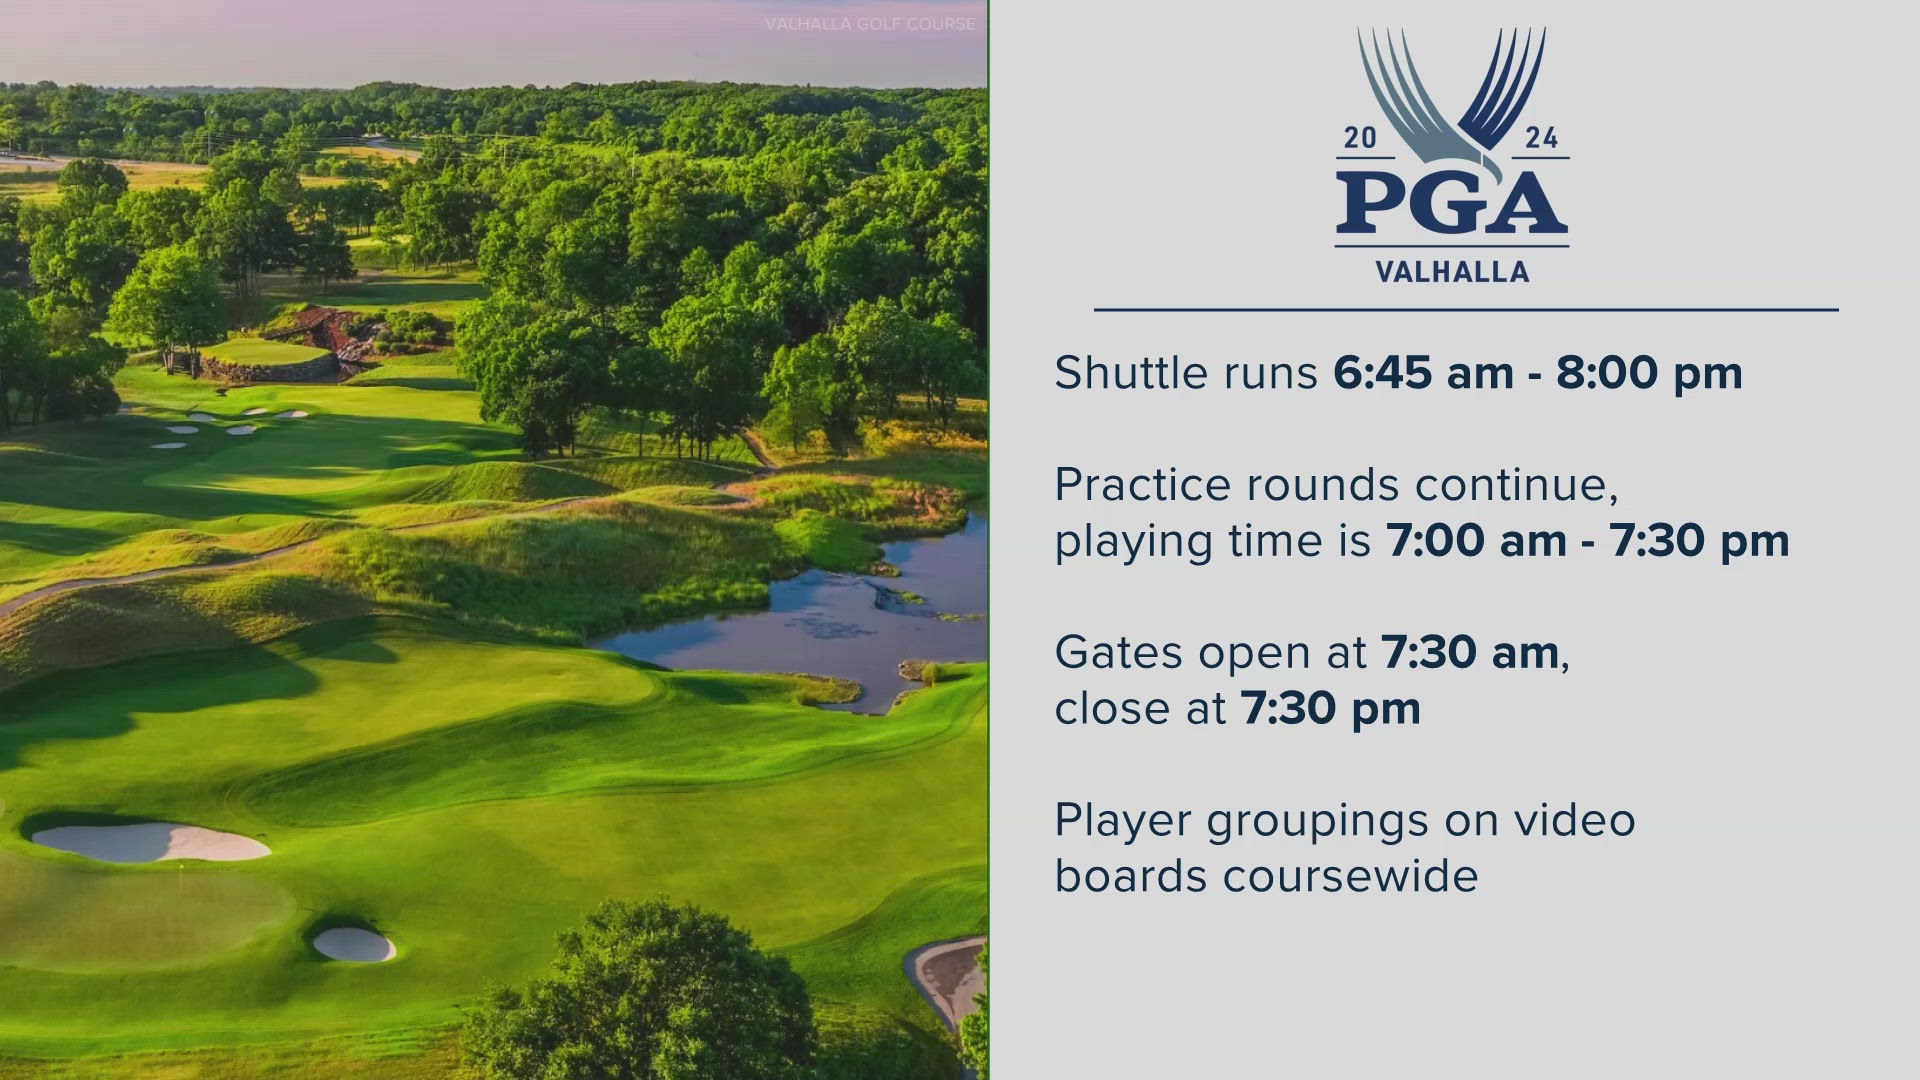 Here is what you need to know ahead of the PGA Championship.